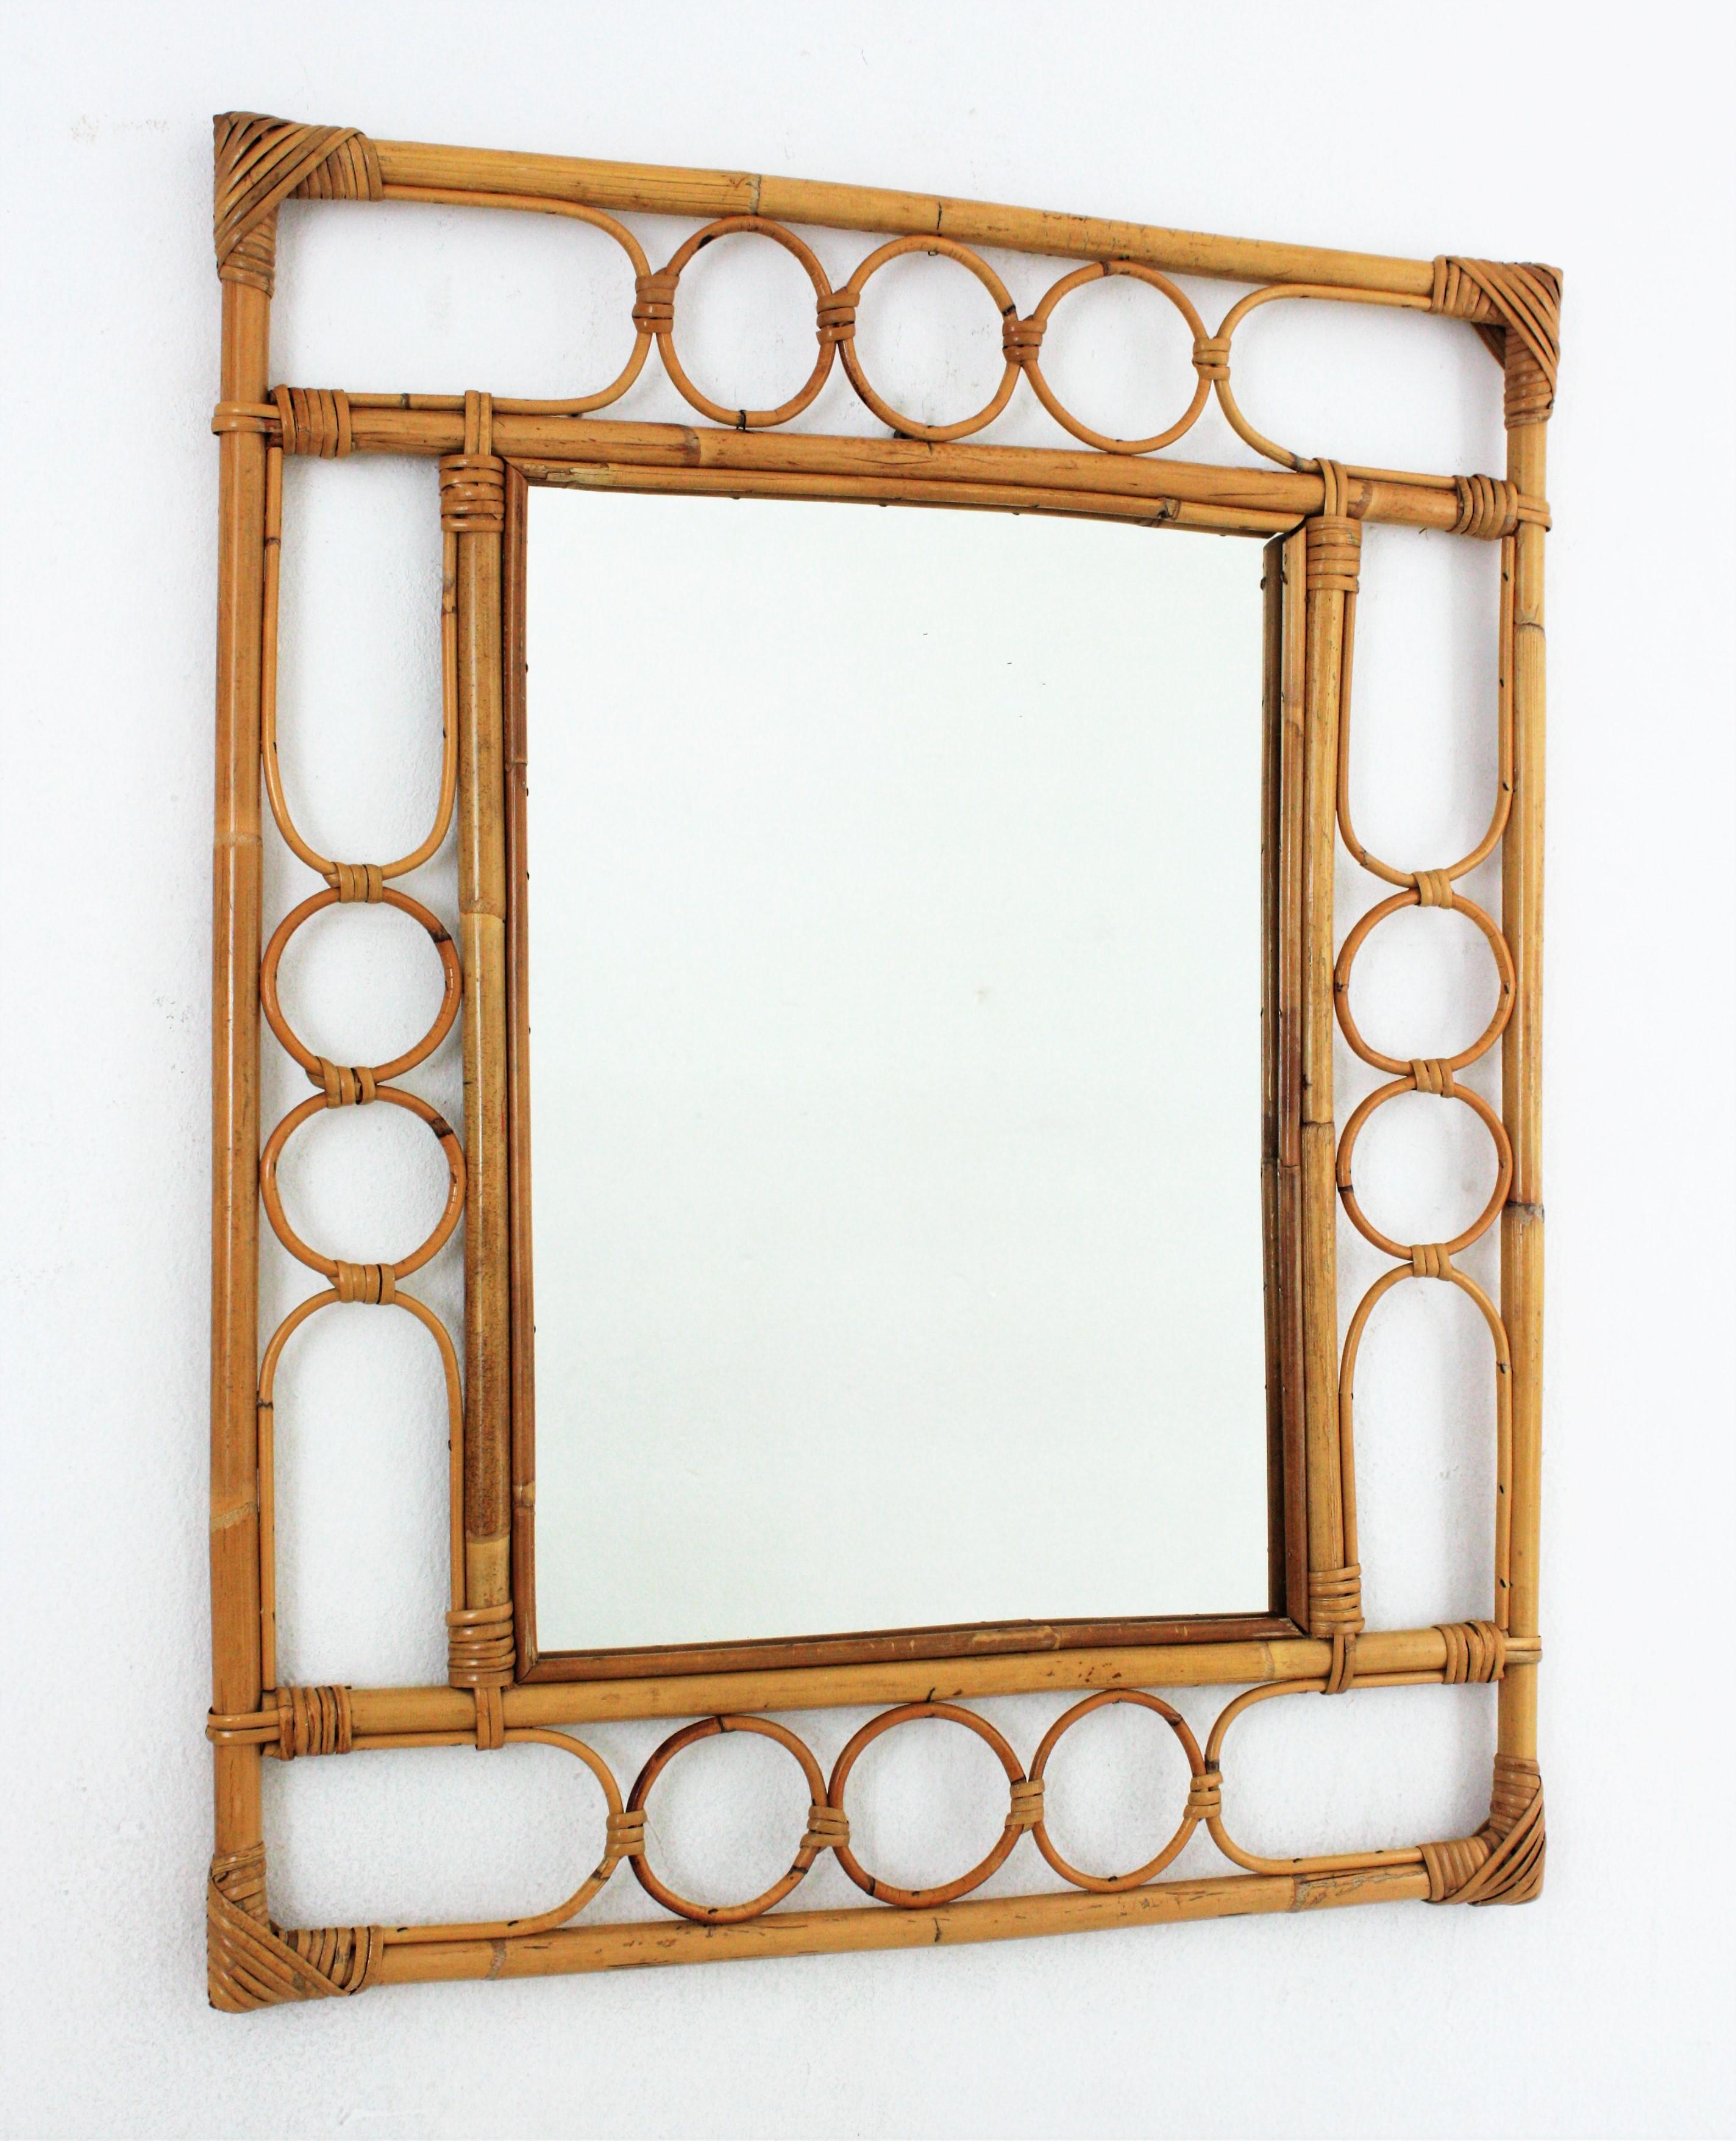 Eye-catching Mid-Century Modern Franco Albini style handcrafted bamboo and rattan mirror. Italy, 1960s.
This mirror features a double bamboo rectangular frame with geometric rattan decoration between the bamboo canes.
This bamboo mirror will be a